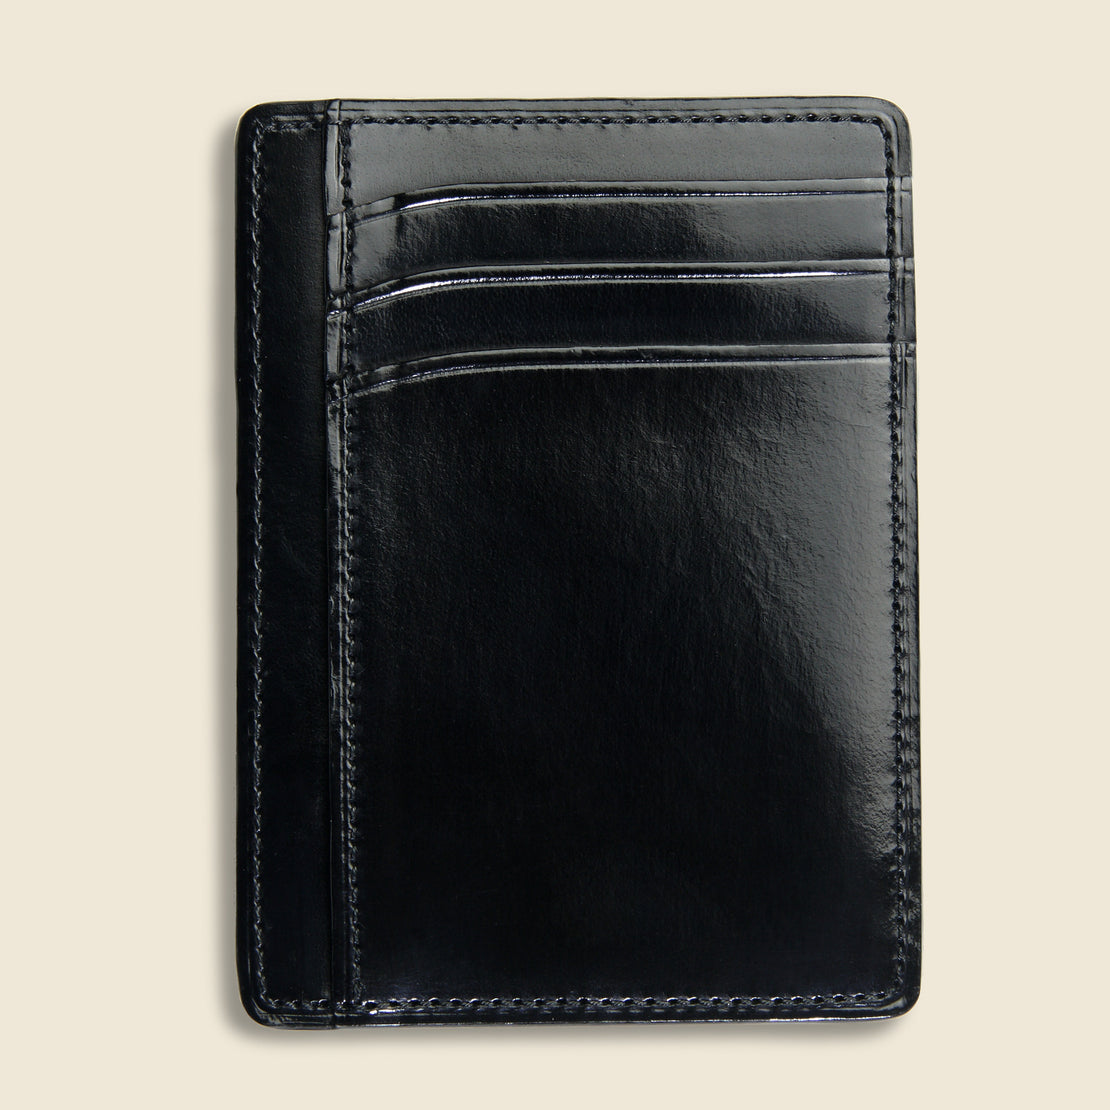 Card and Document Case - Black - Il Bussetto - STAG Provisions - Accessories - Wallets